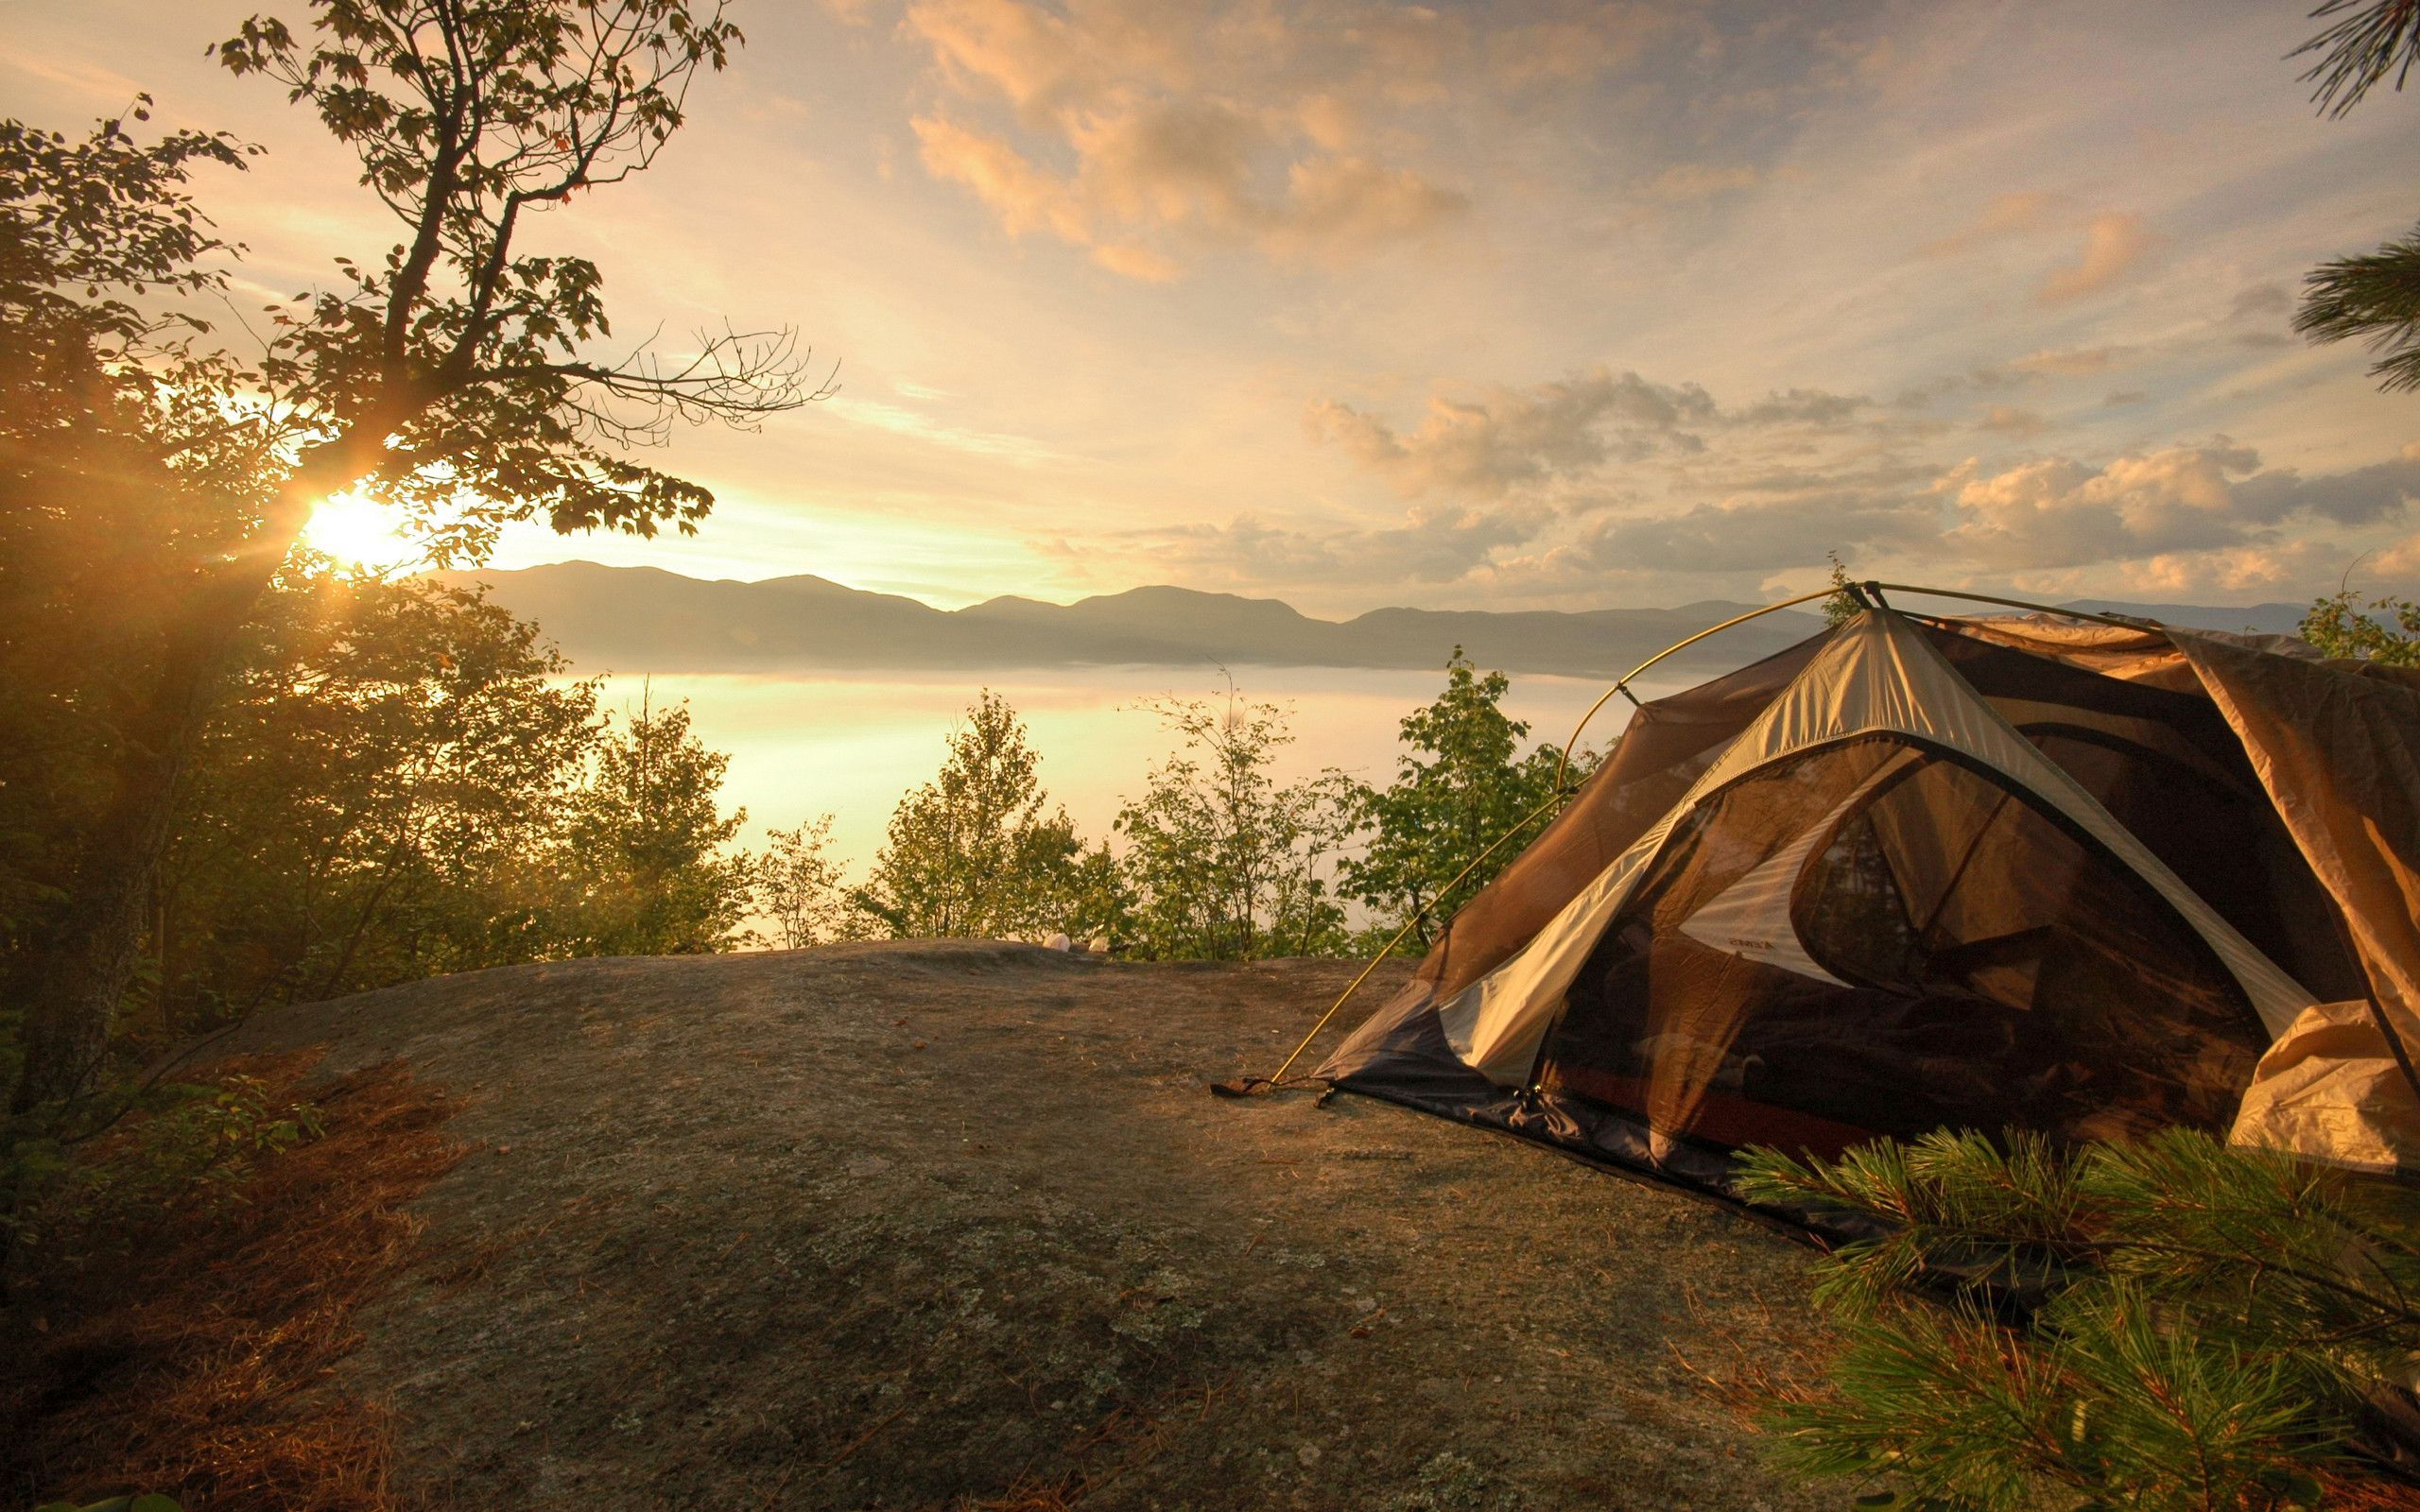 A tent on a cliff overlooking a lake at sunset - Camping